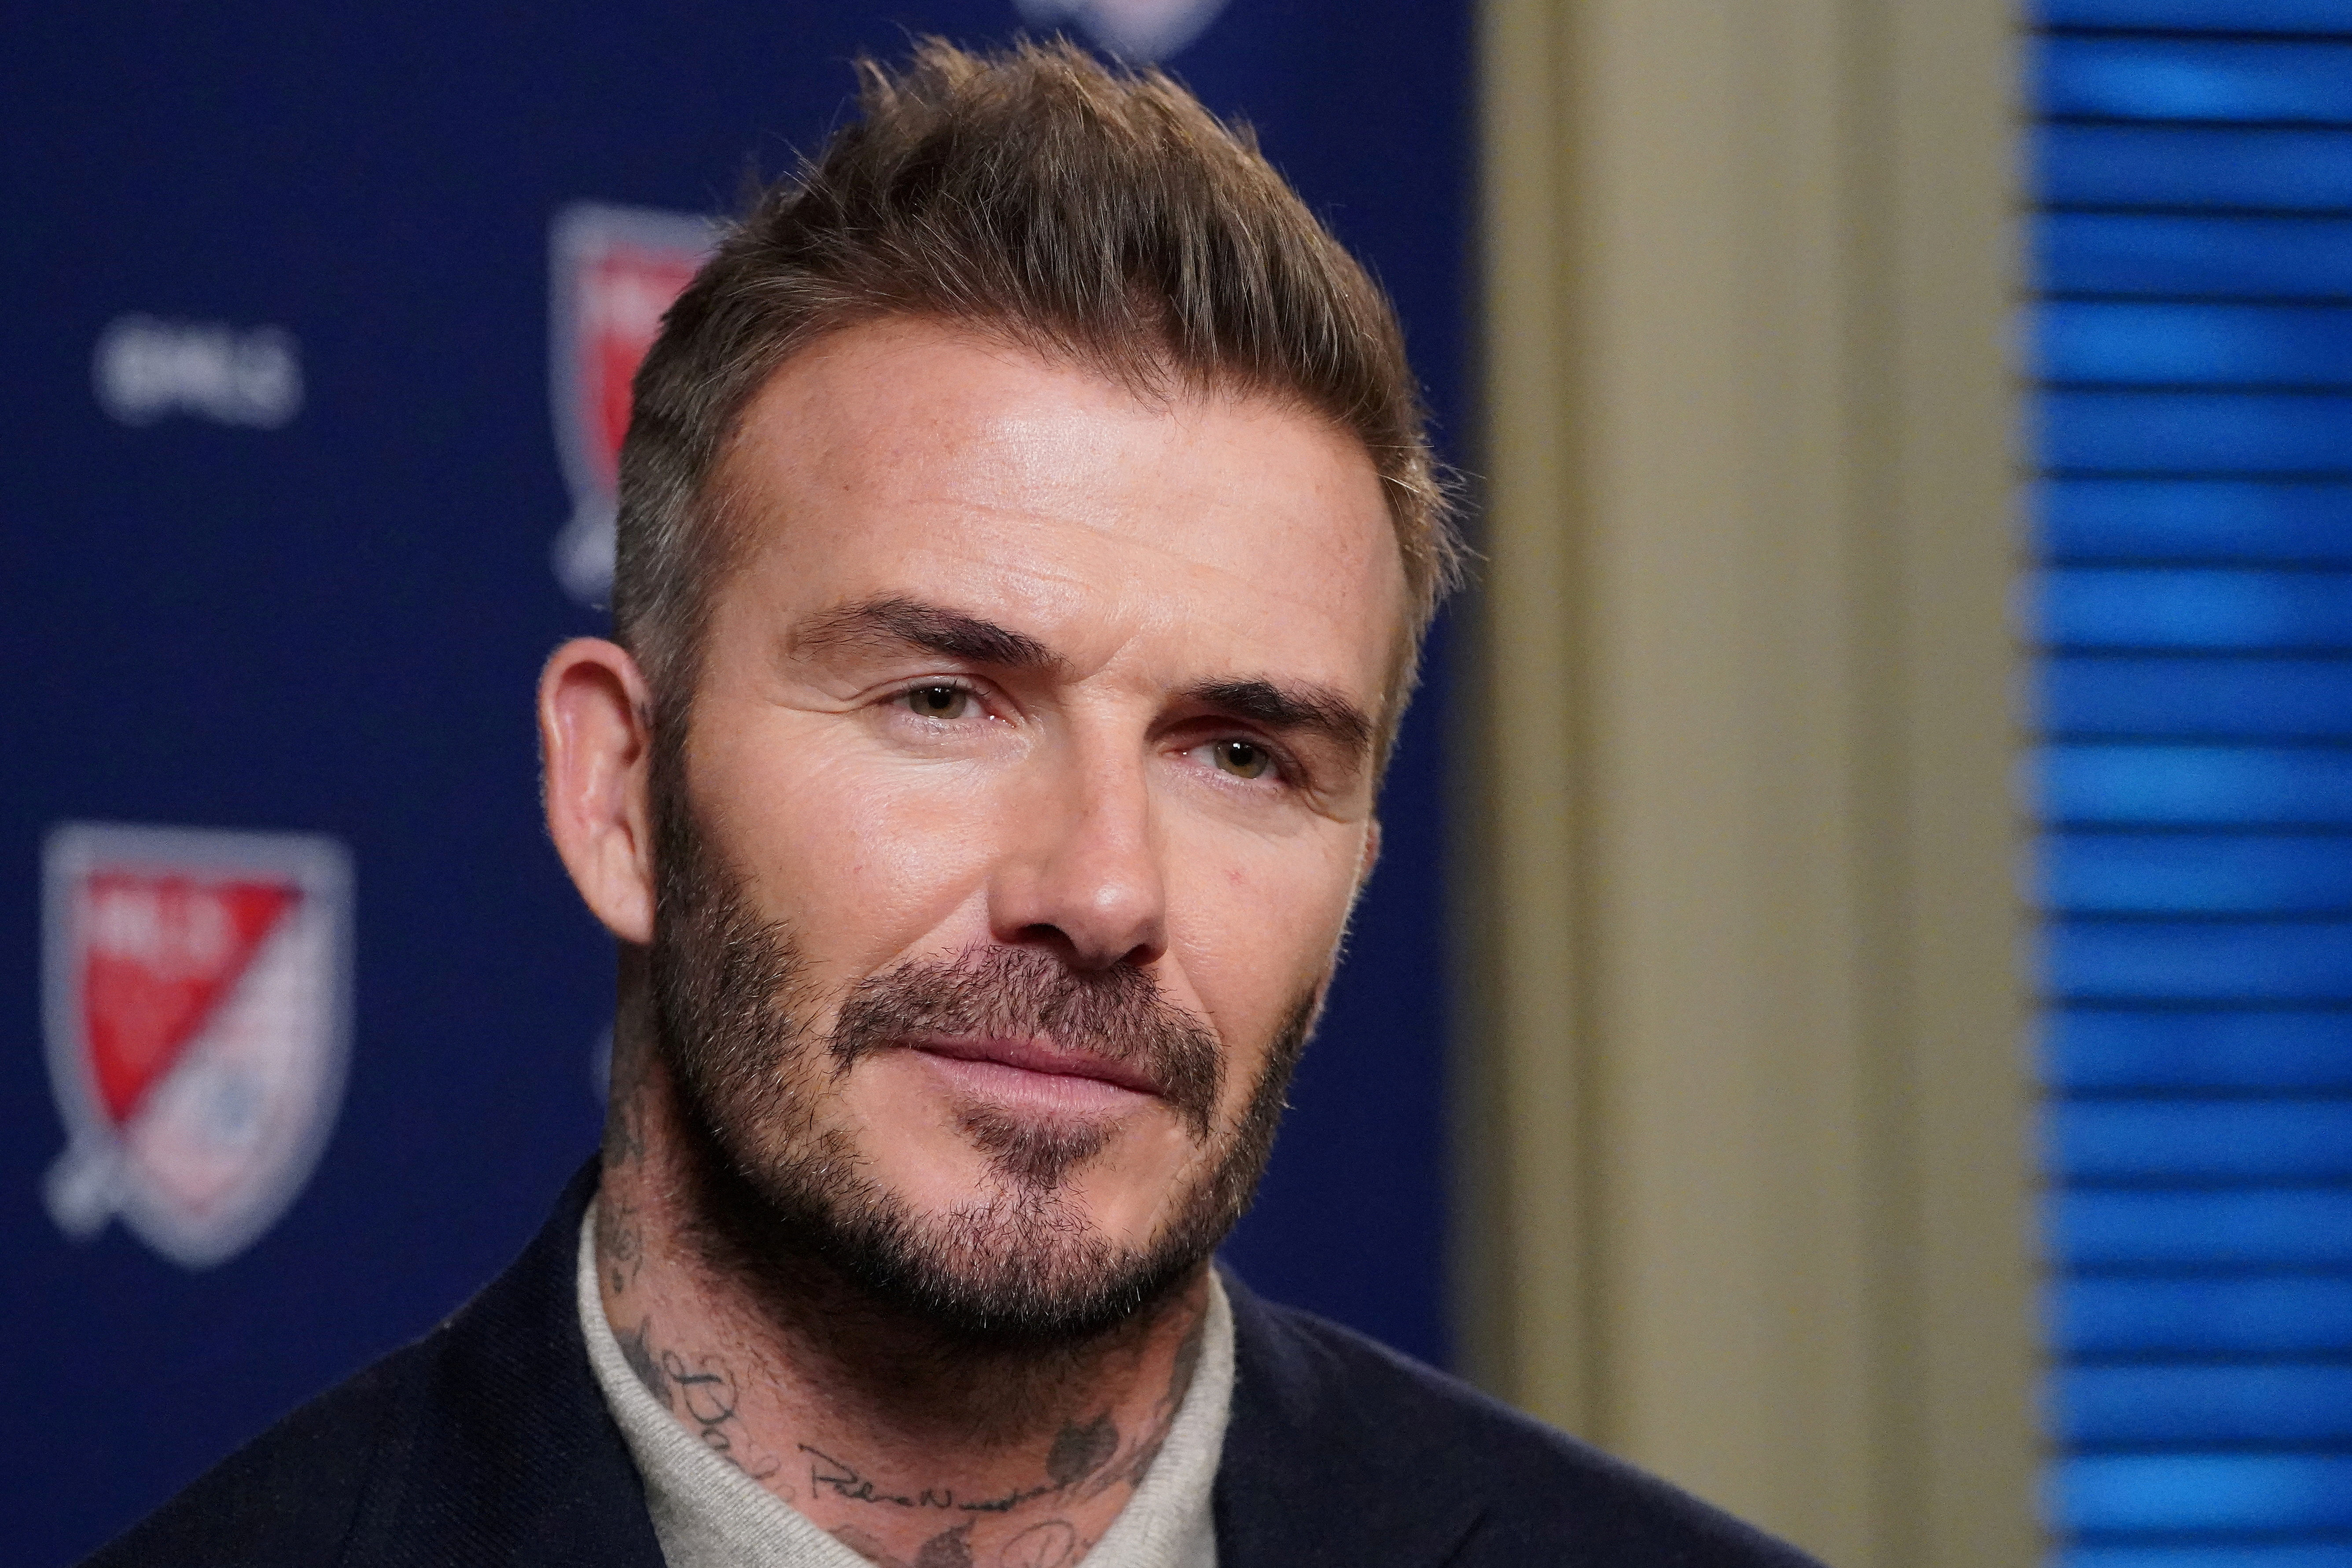 Former soccer player and MLS team owner David Beckham speaks during an interview in the Manhattan borough of New York City